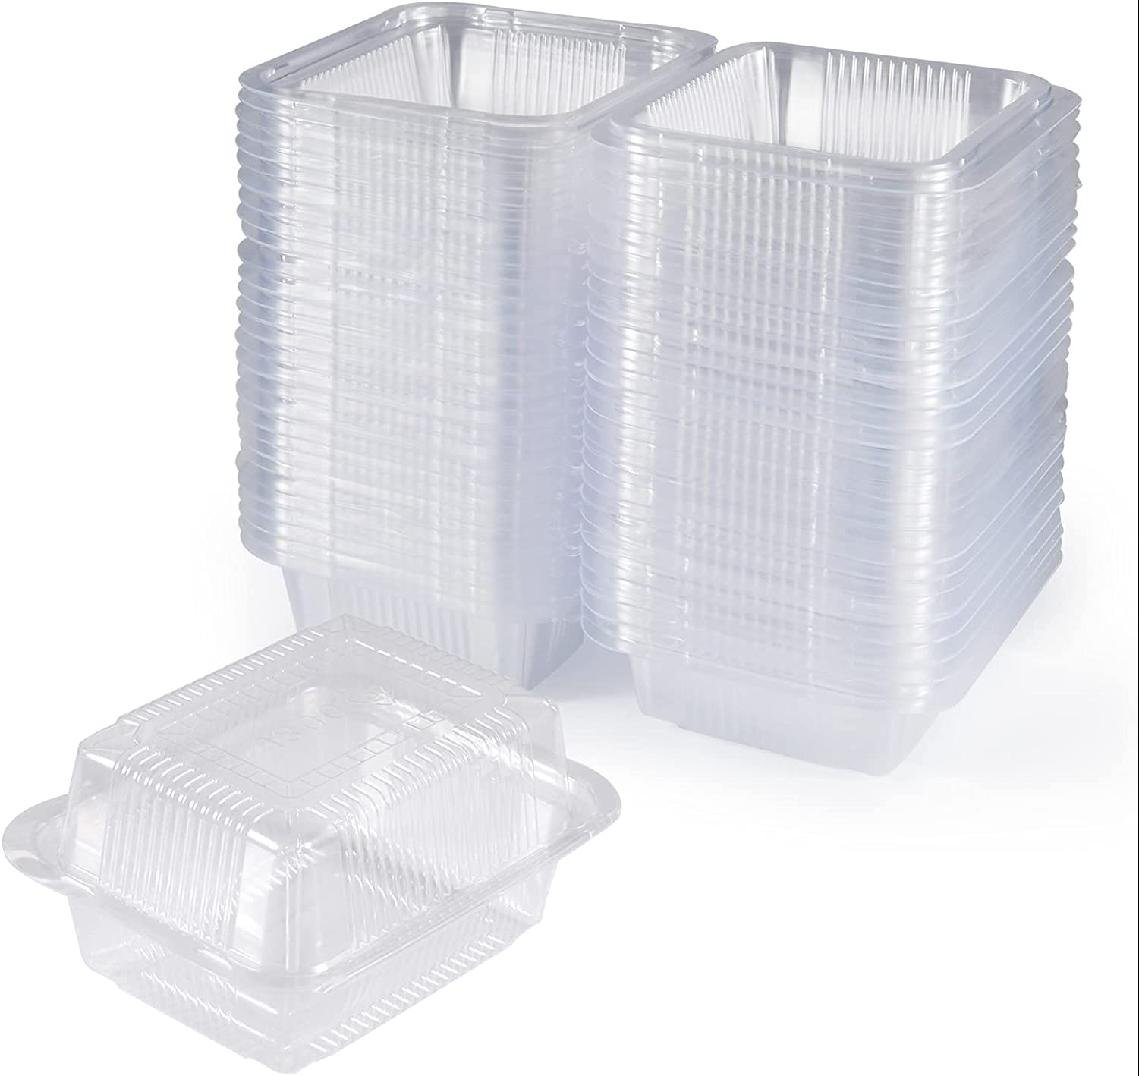 Prep & Savour Blinkhorn Disposable Plastic Food Container for 100 Guests